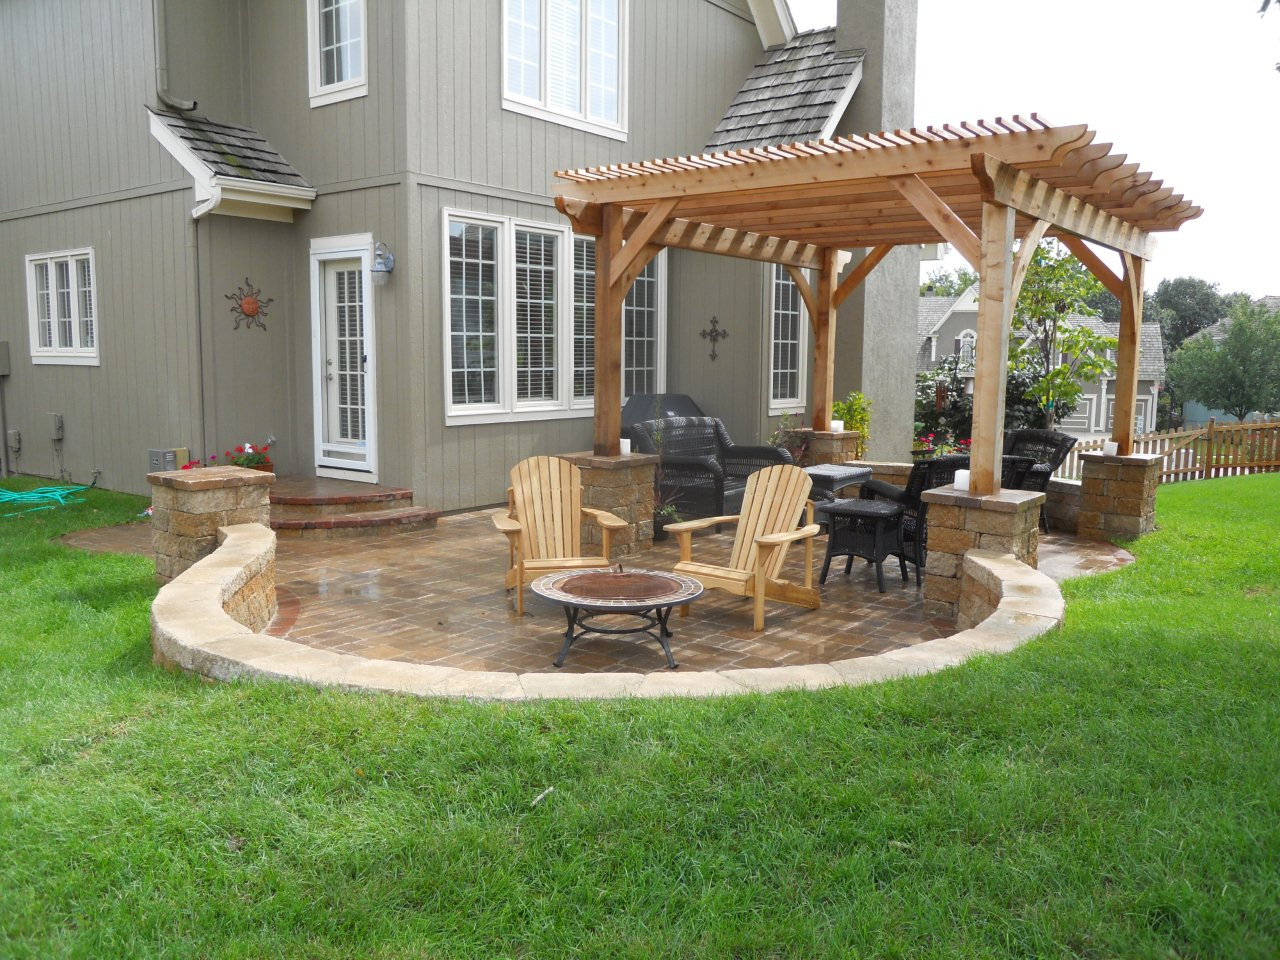 Backyard Deck And Patio Ideas
 Backyard Patio Ideas for Making the Outdoor More